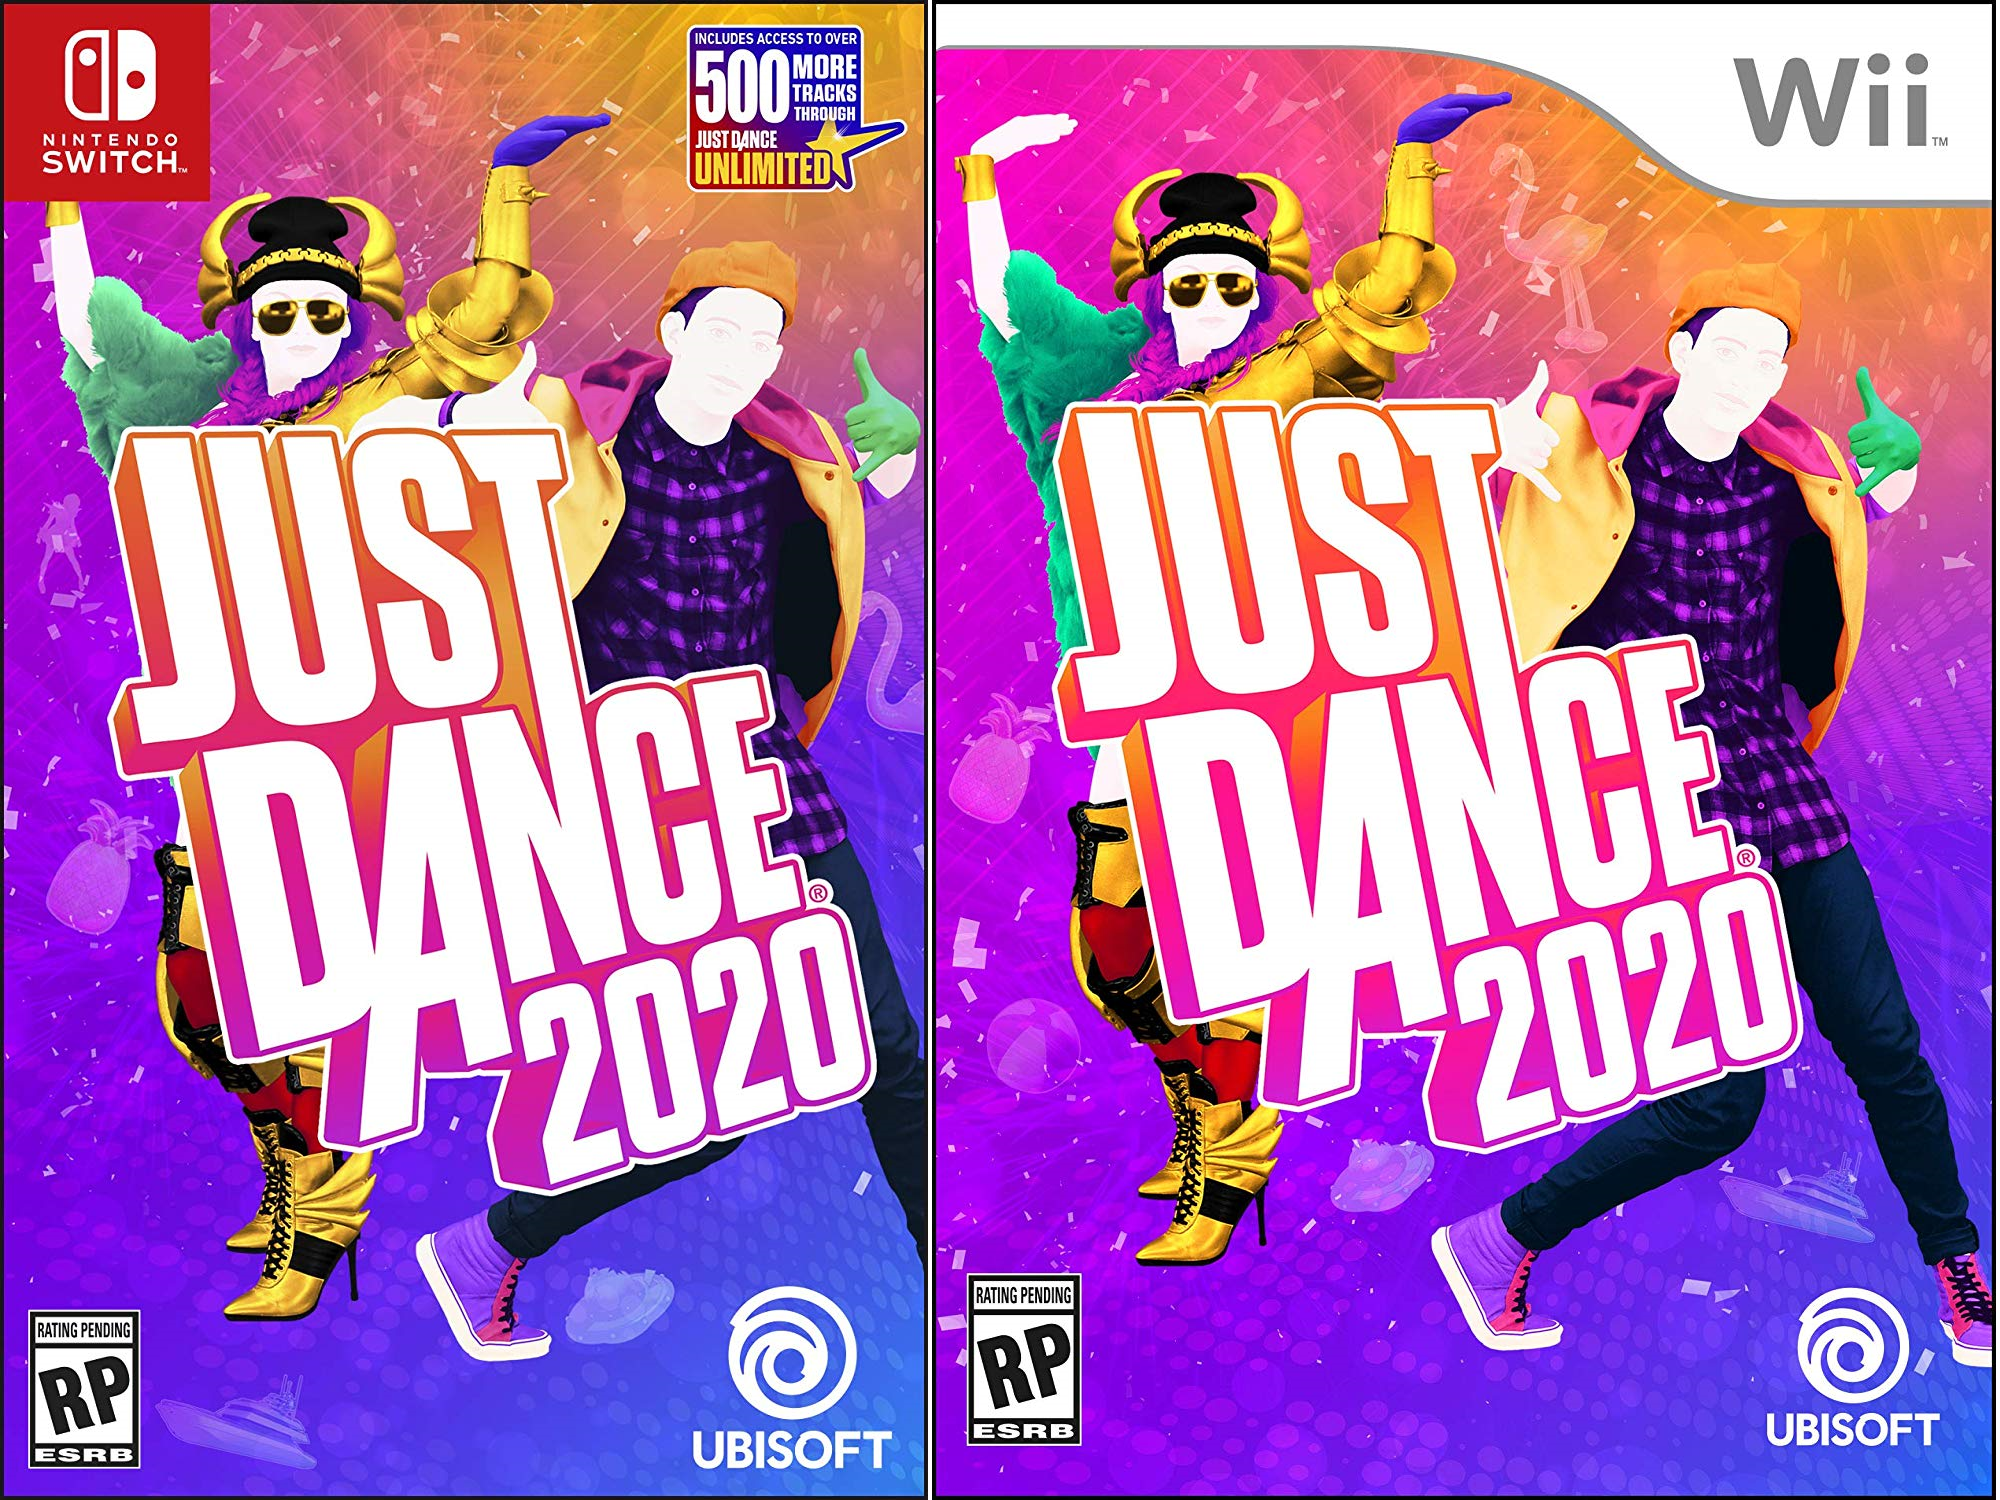 switch game just dance 2020